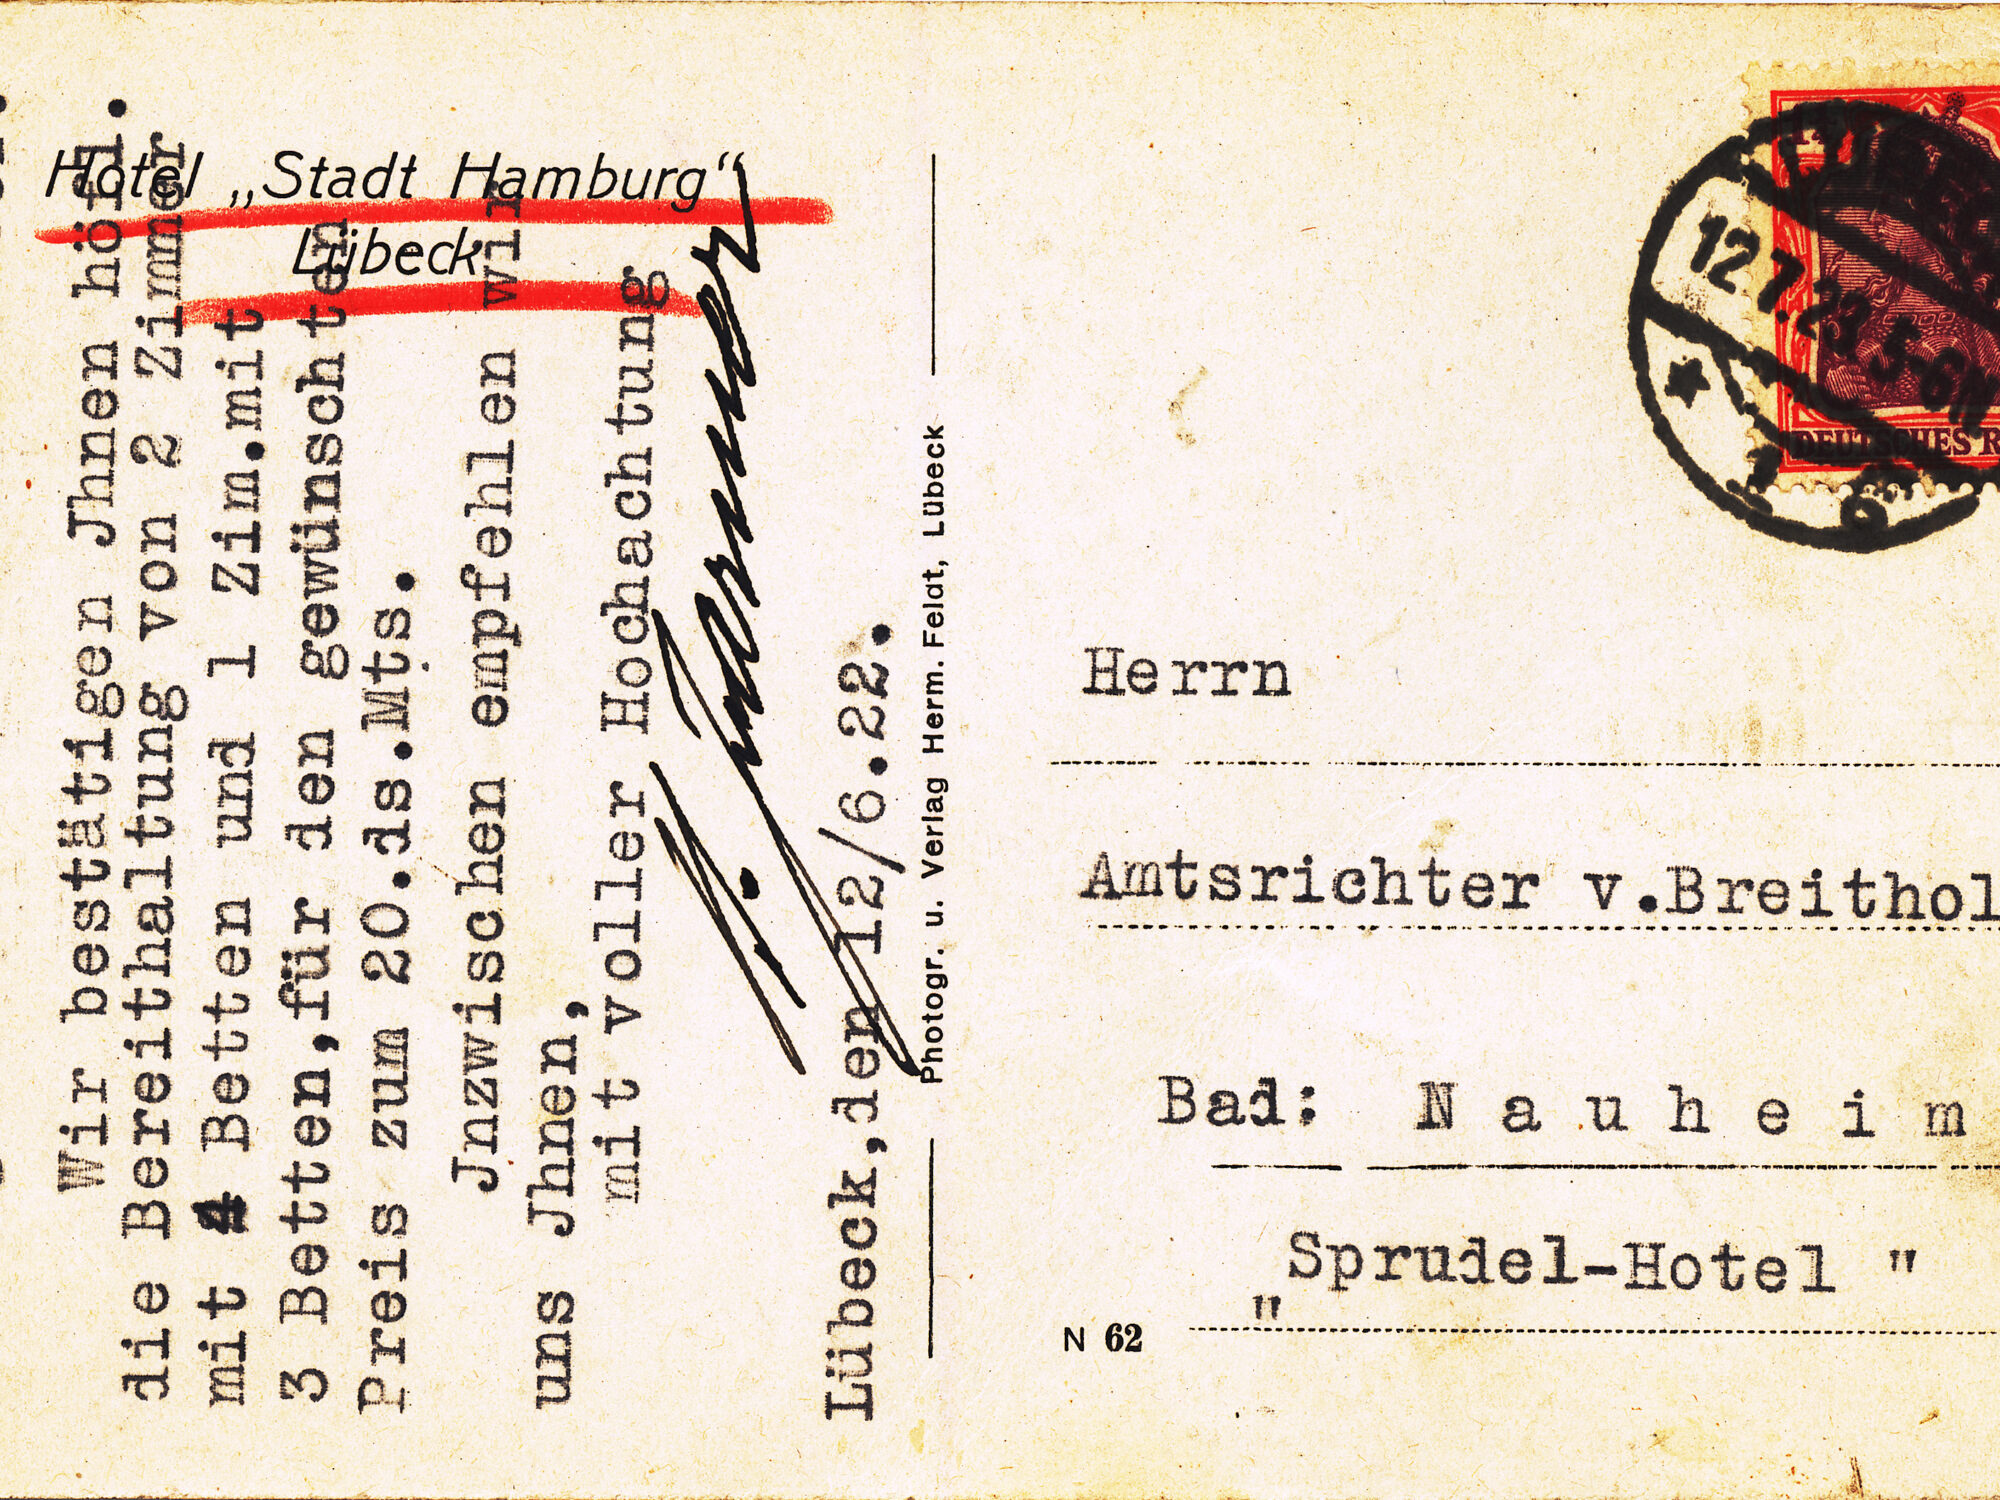 Reservation confirmation from 1922, personally signed by Heinrich Wilhelm Johann Theodor Jarmer.